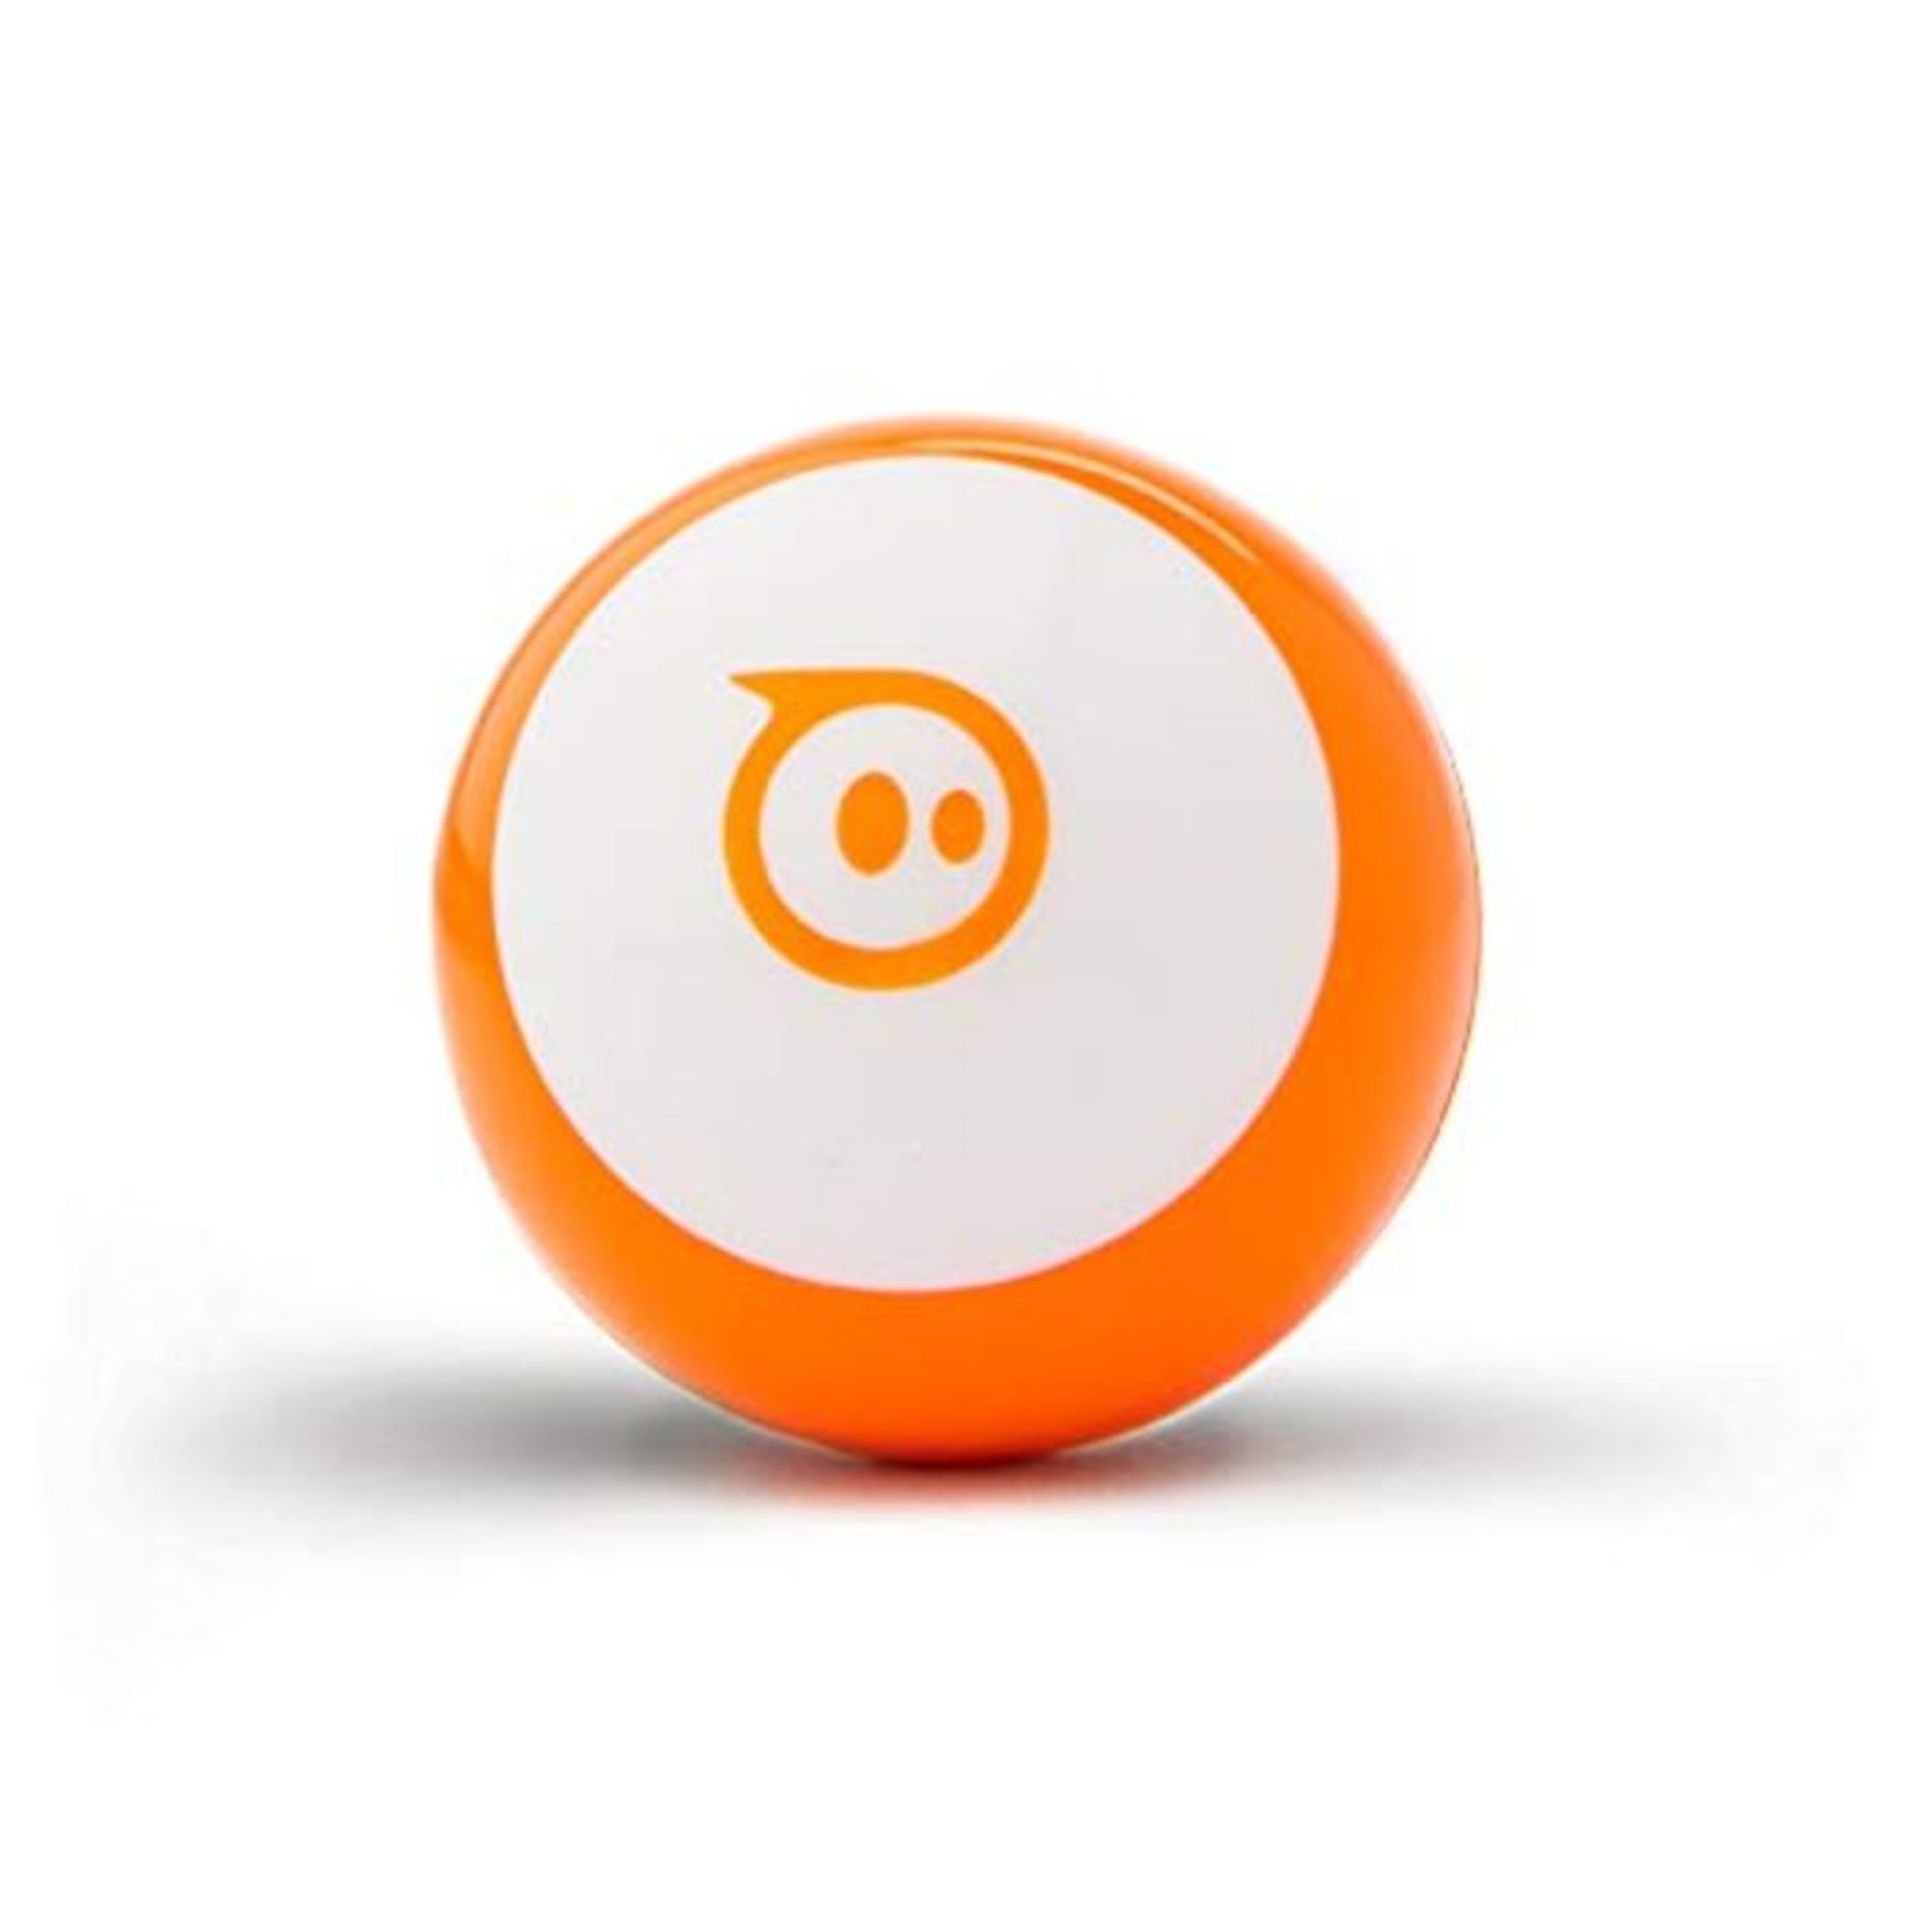 Sphero Mini Orange: App-Controlled Robotic Ball, STEM Learning and Coding Toy, Ages 8